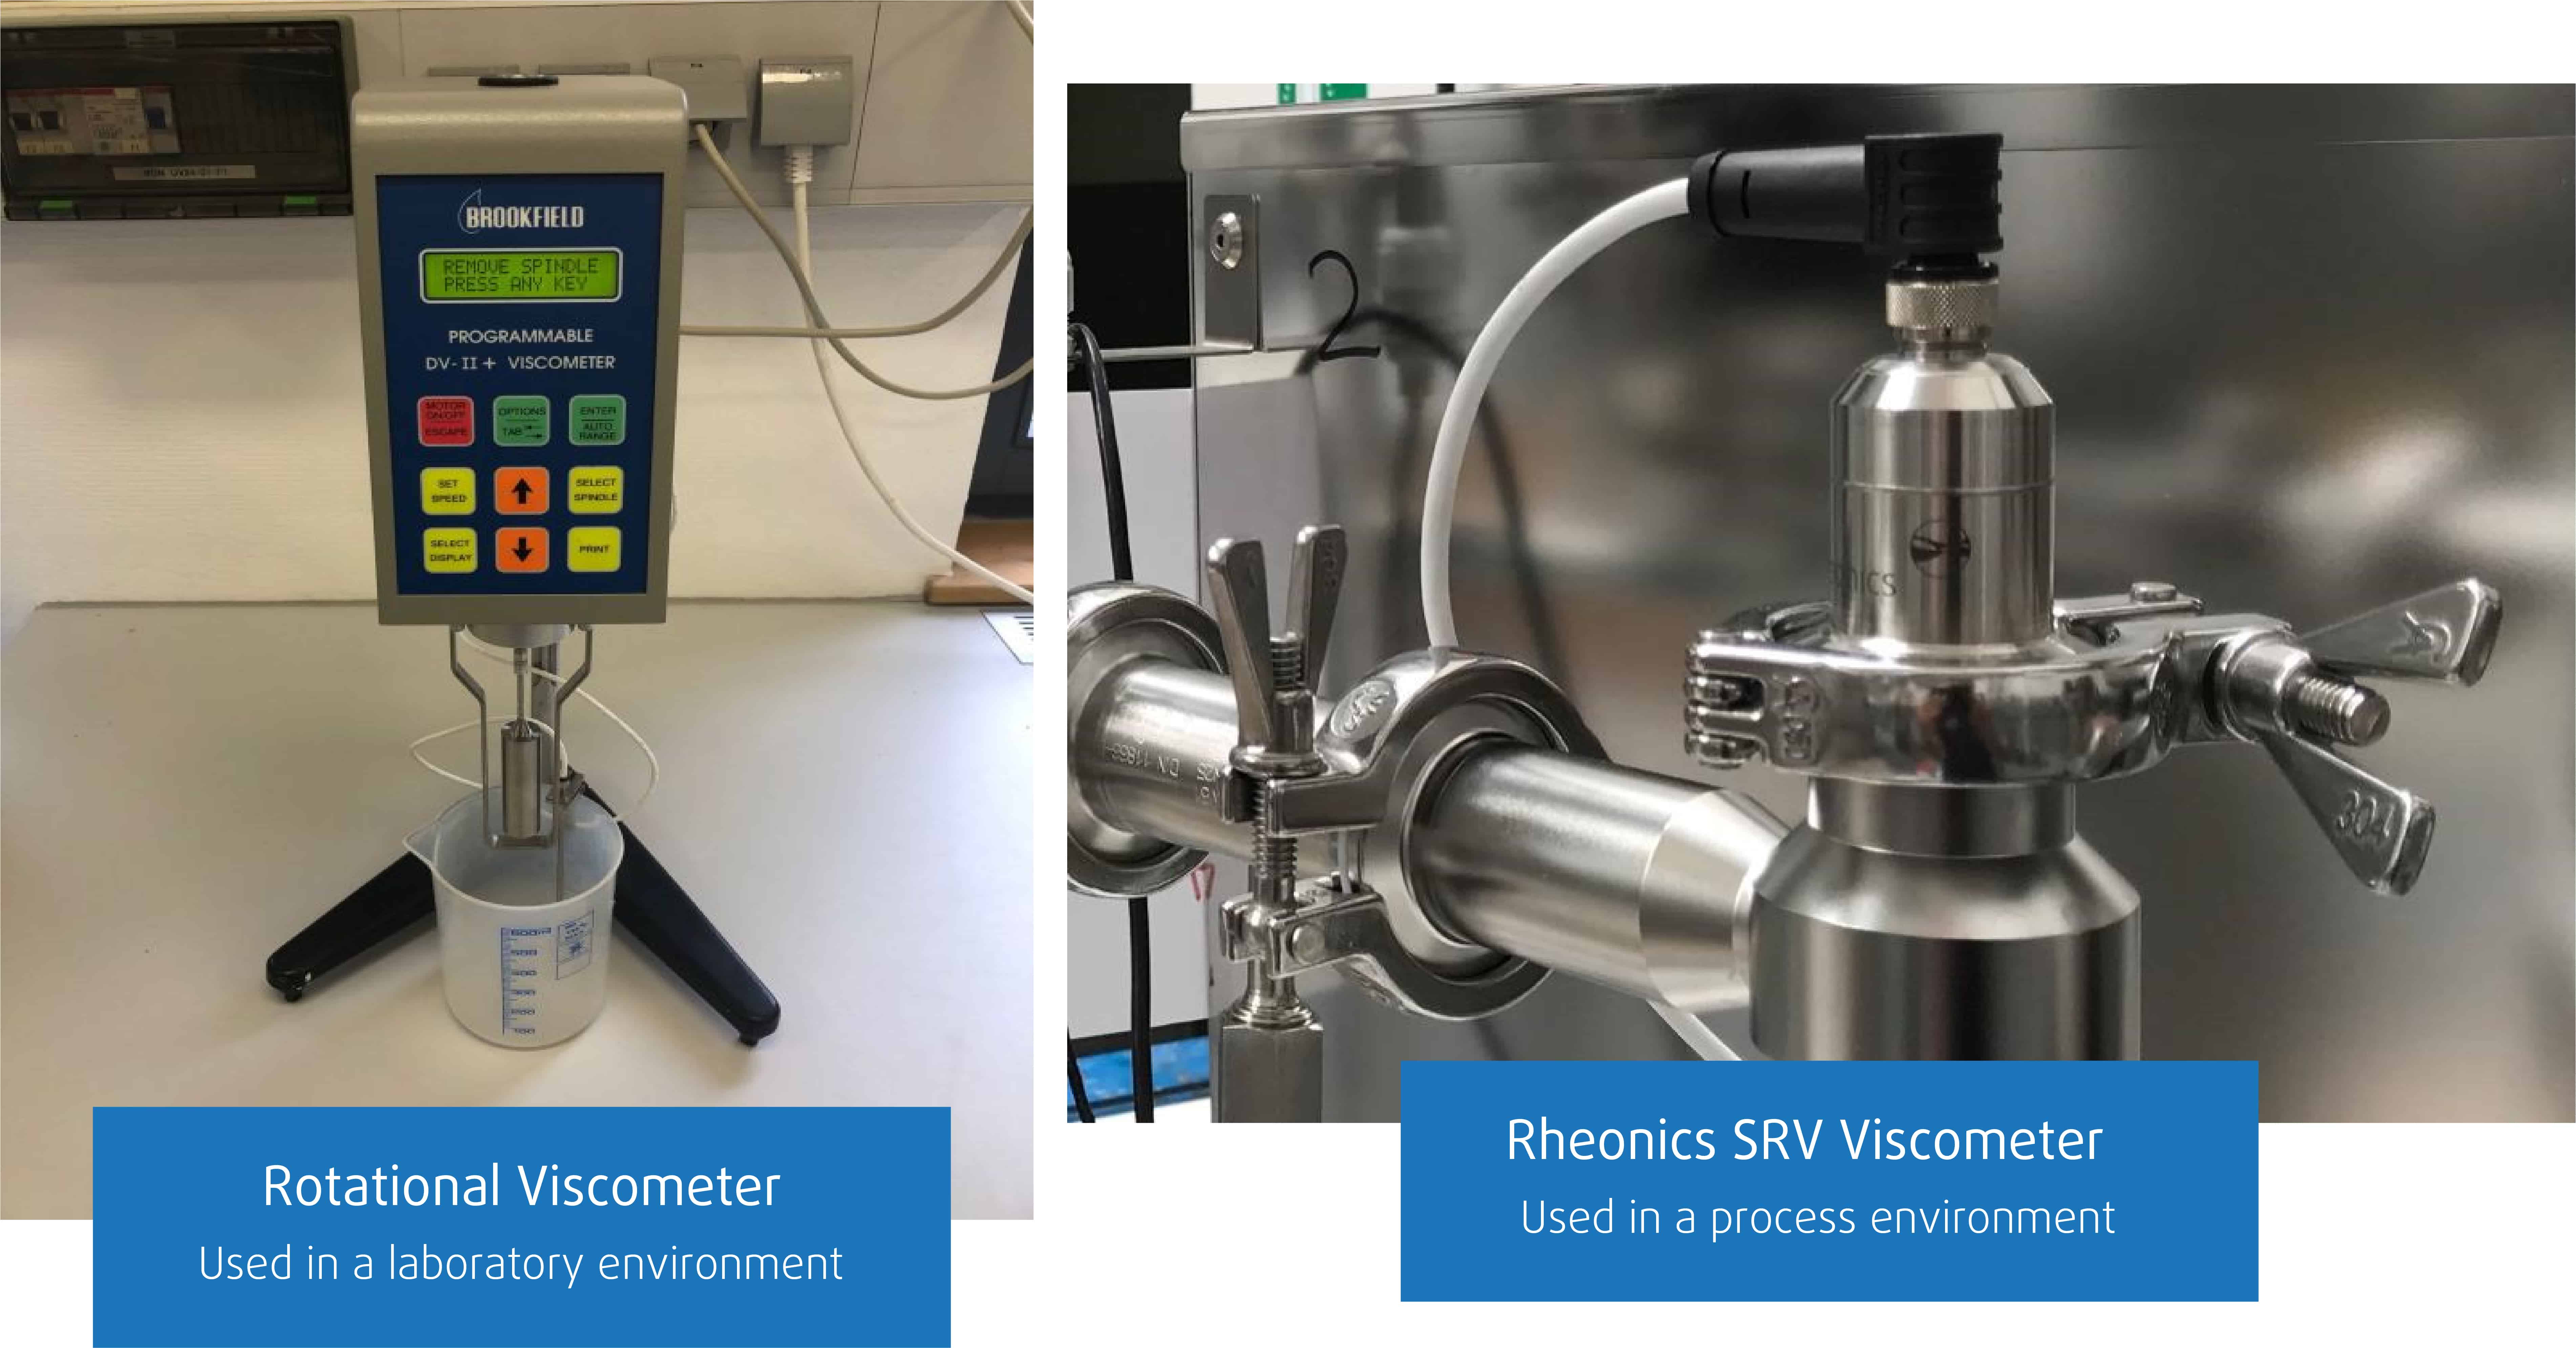 SRV compared with rotational viscometer – more suited for process environment